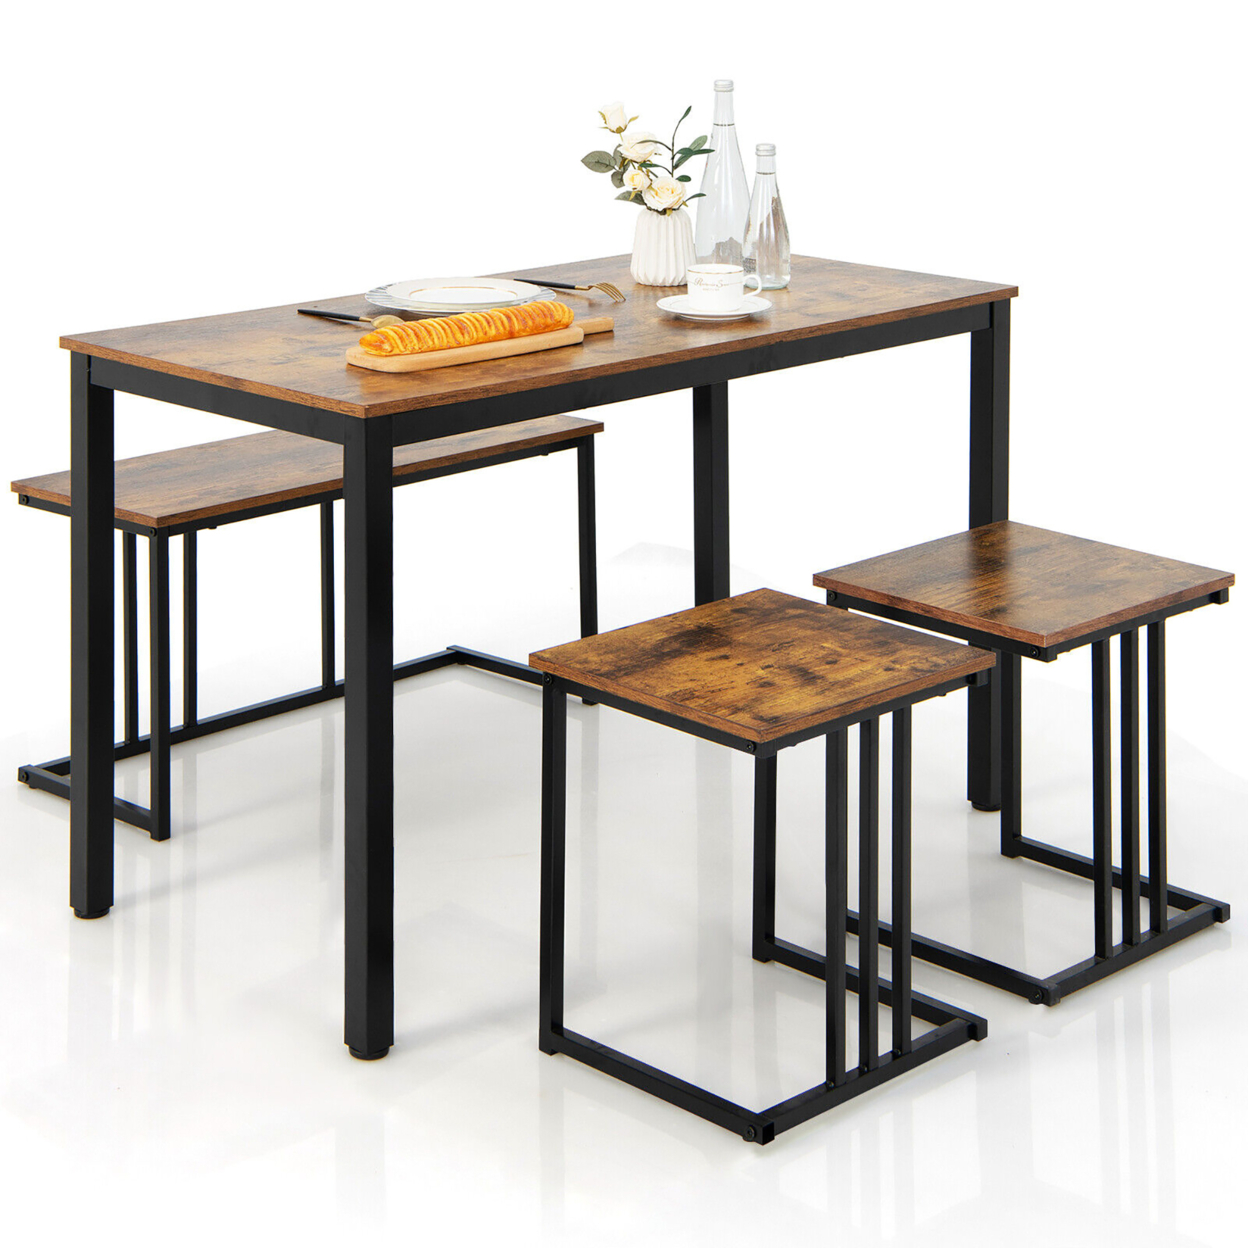 4-Piece Dining Table Set Industrial Kitchen Table Set W/ Bench & 2 Stools For 4